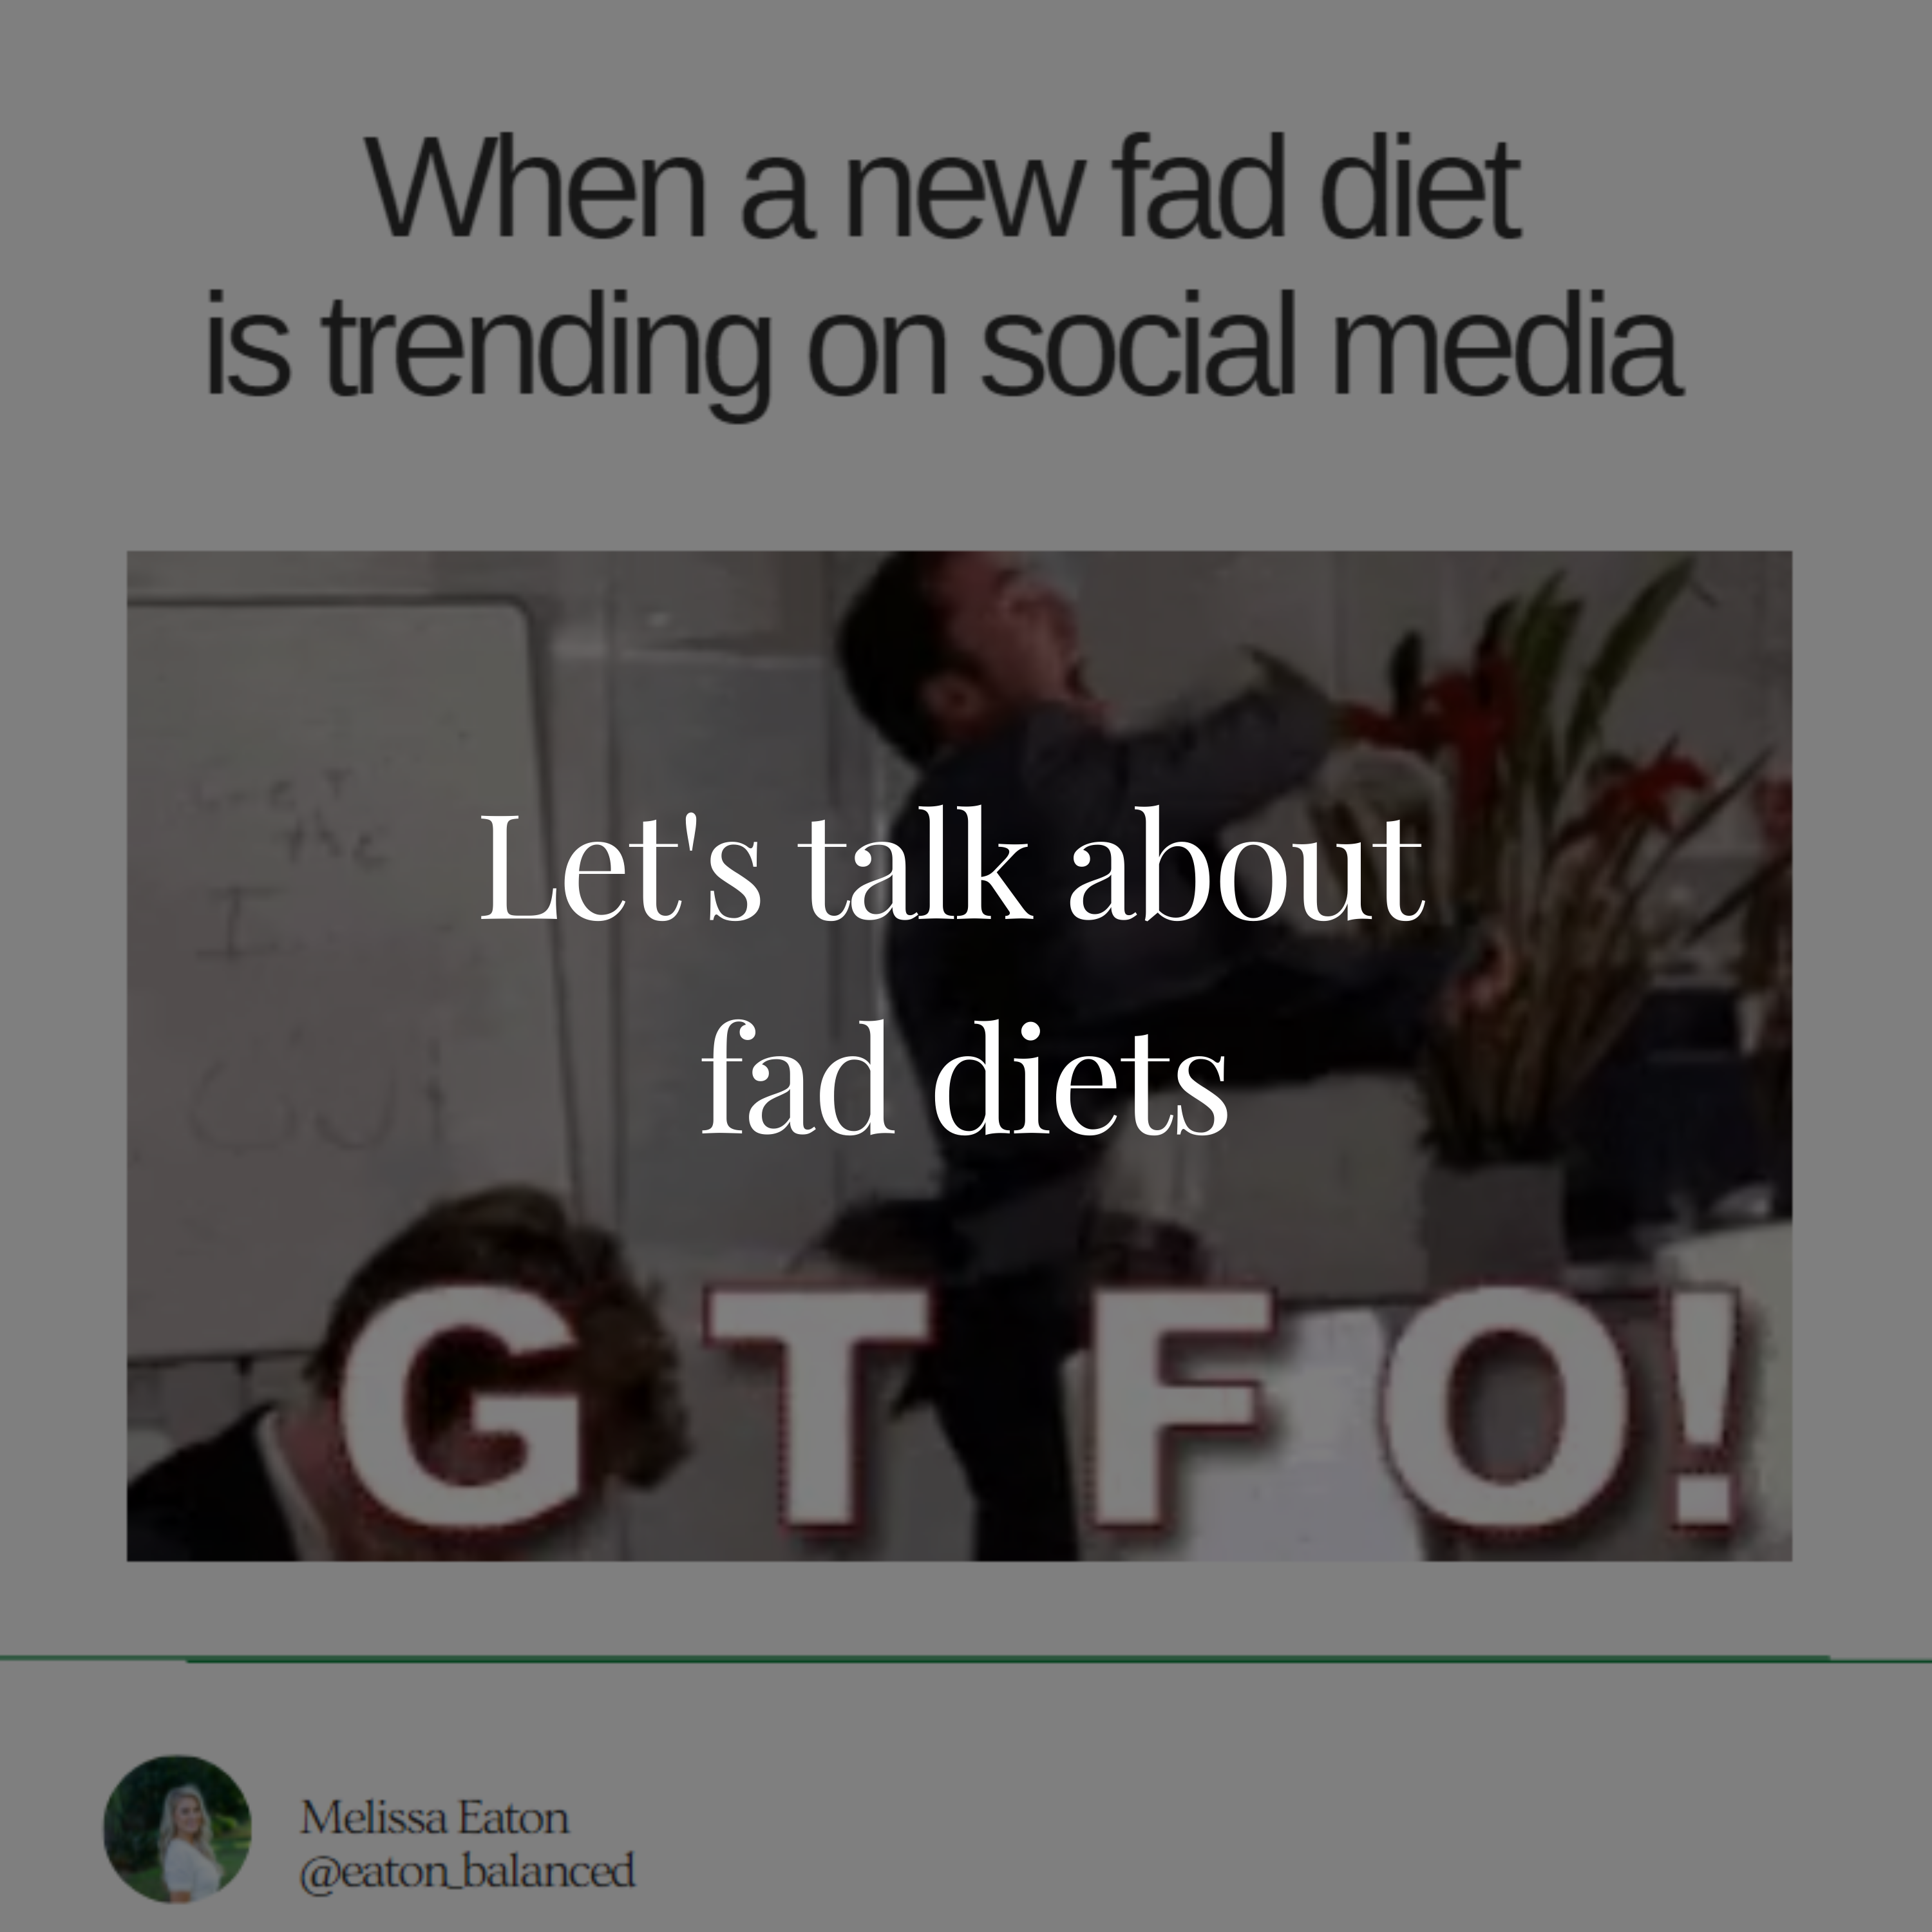 Let's talk about  fad diets